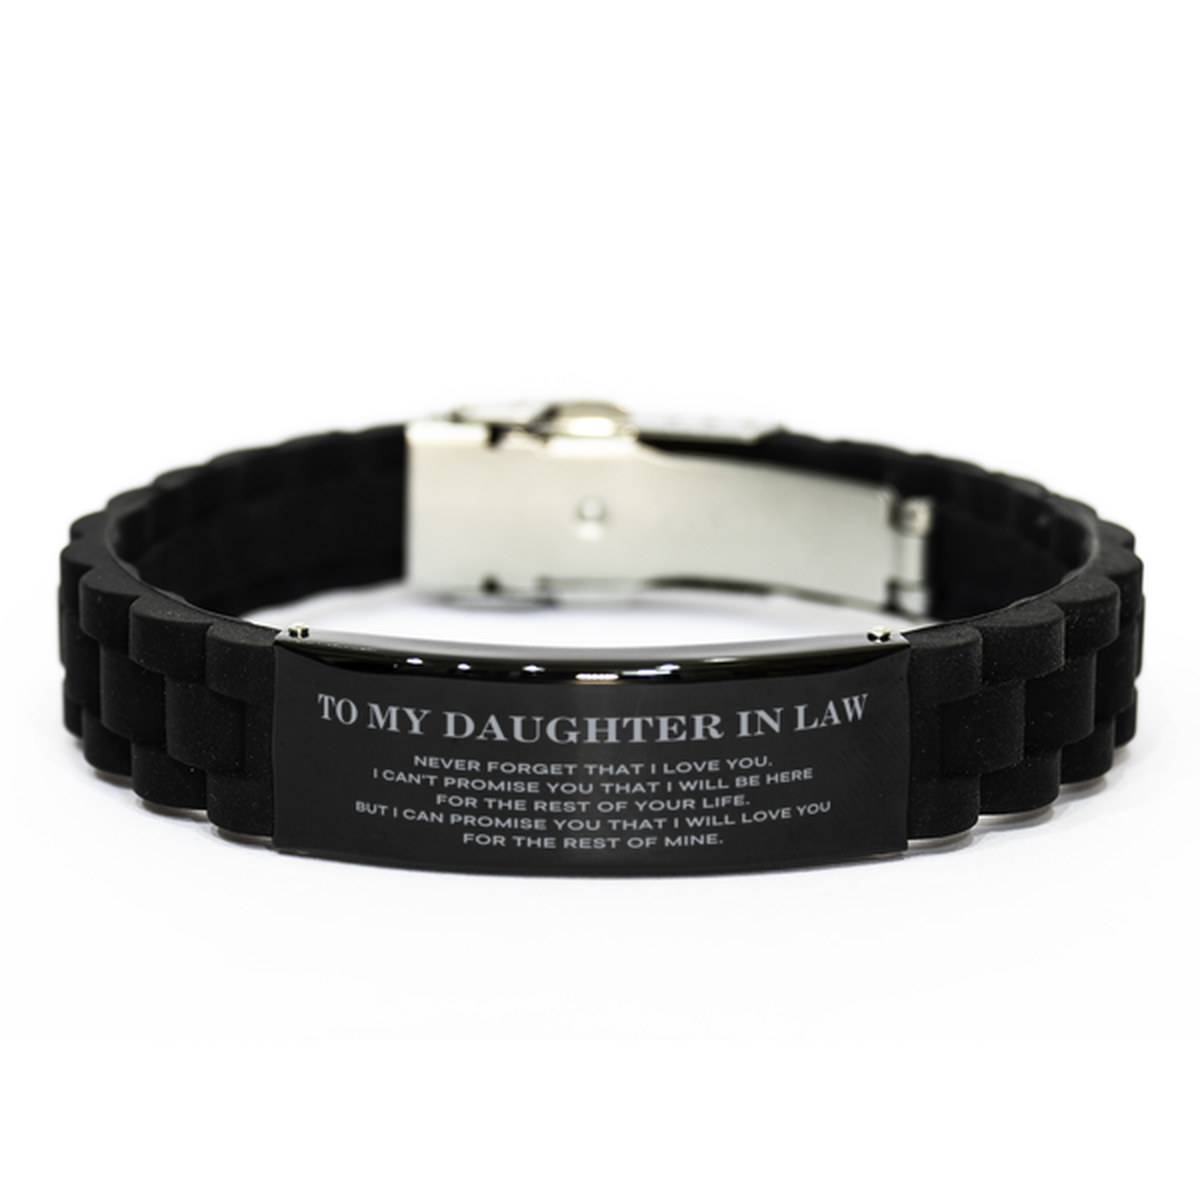 To My Daughter In Law Gifts, I will love you for the rest of mine, Love Daughter In Law Bracelet, Birthday Christmas Unique Black Glidelock Clasp Bracelet For Daughter In Law